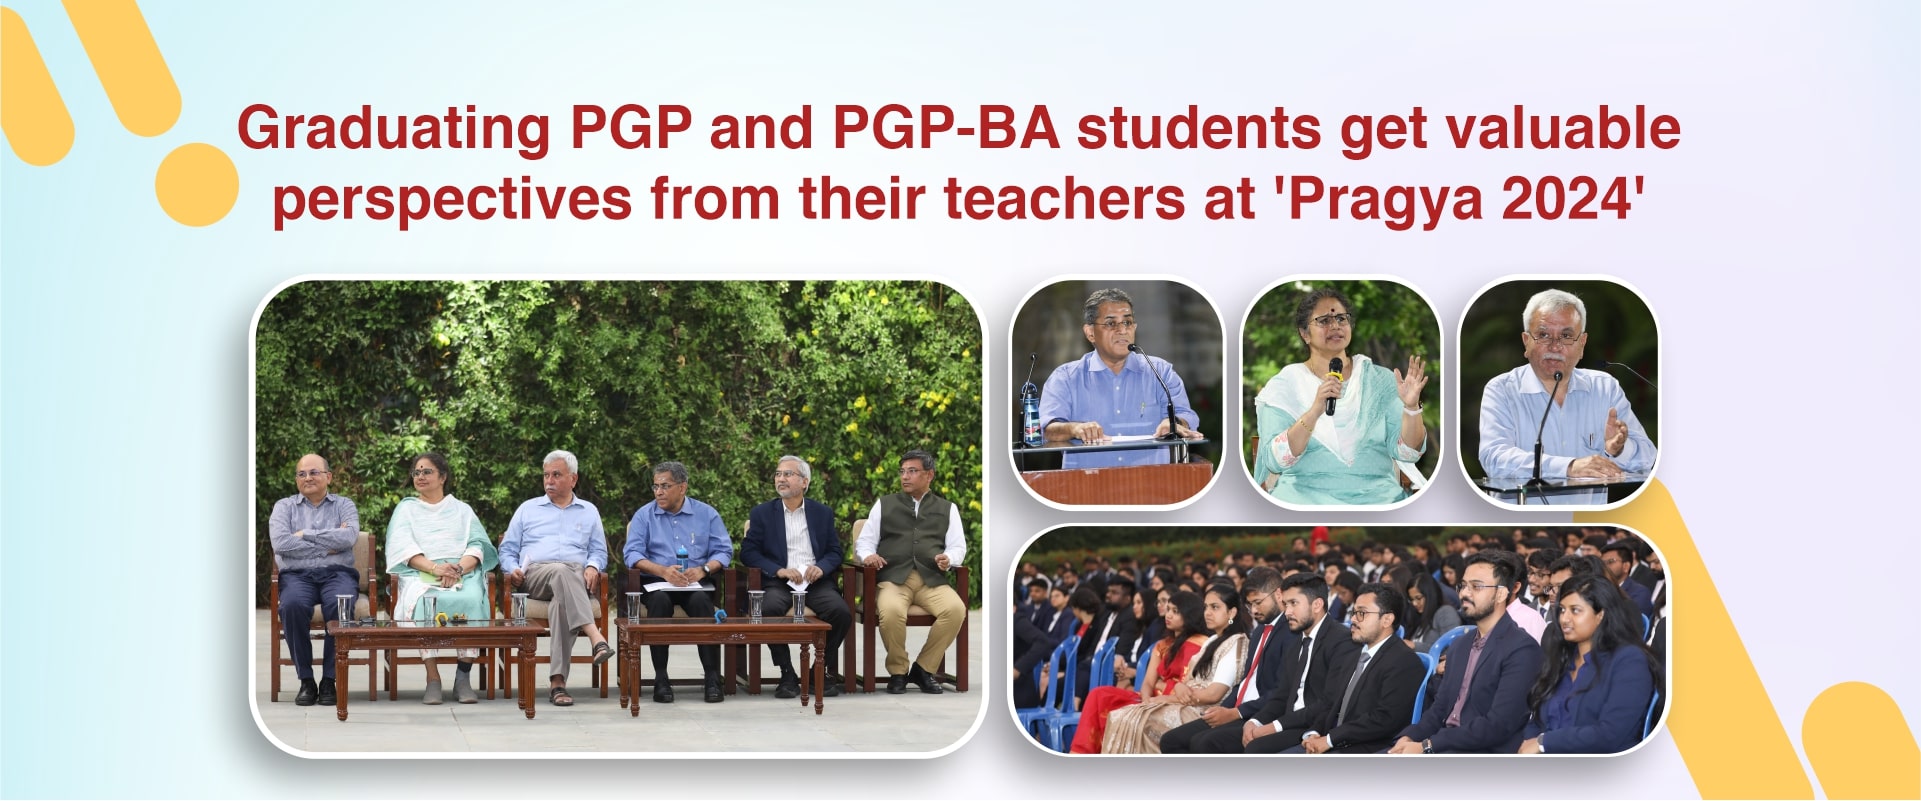 Graduating PGP and PGP-BA students get valuable perspectives from their teachers at ‘Pragya 2024’ 